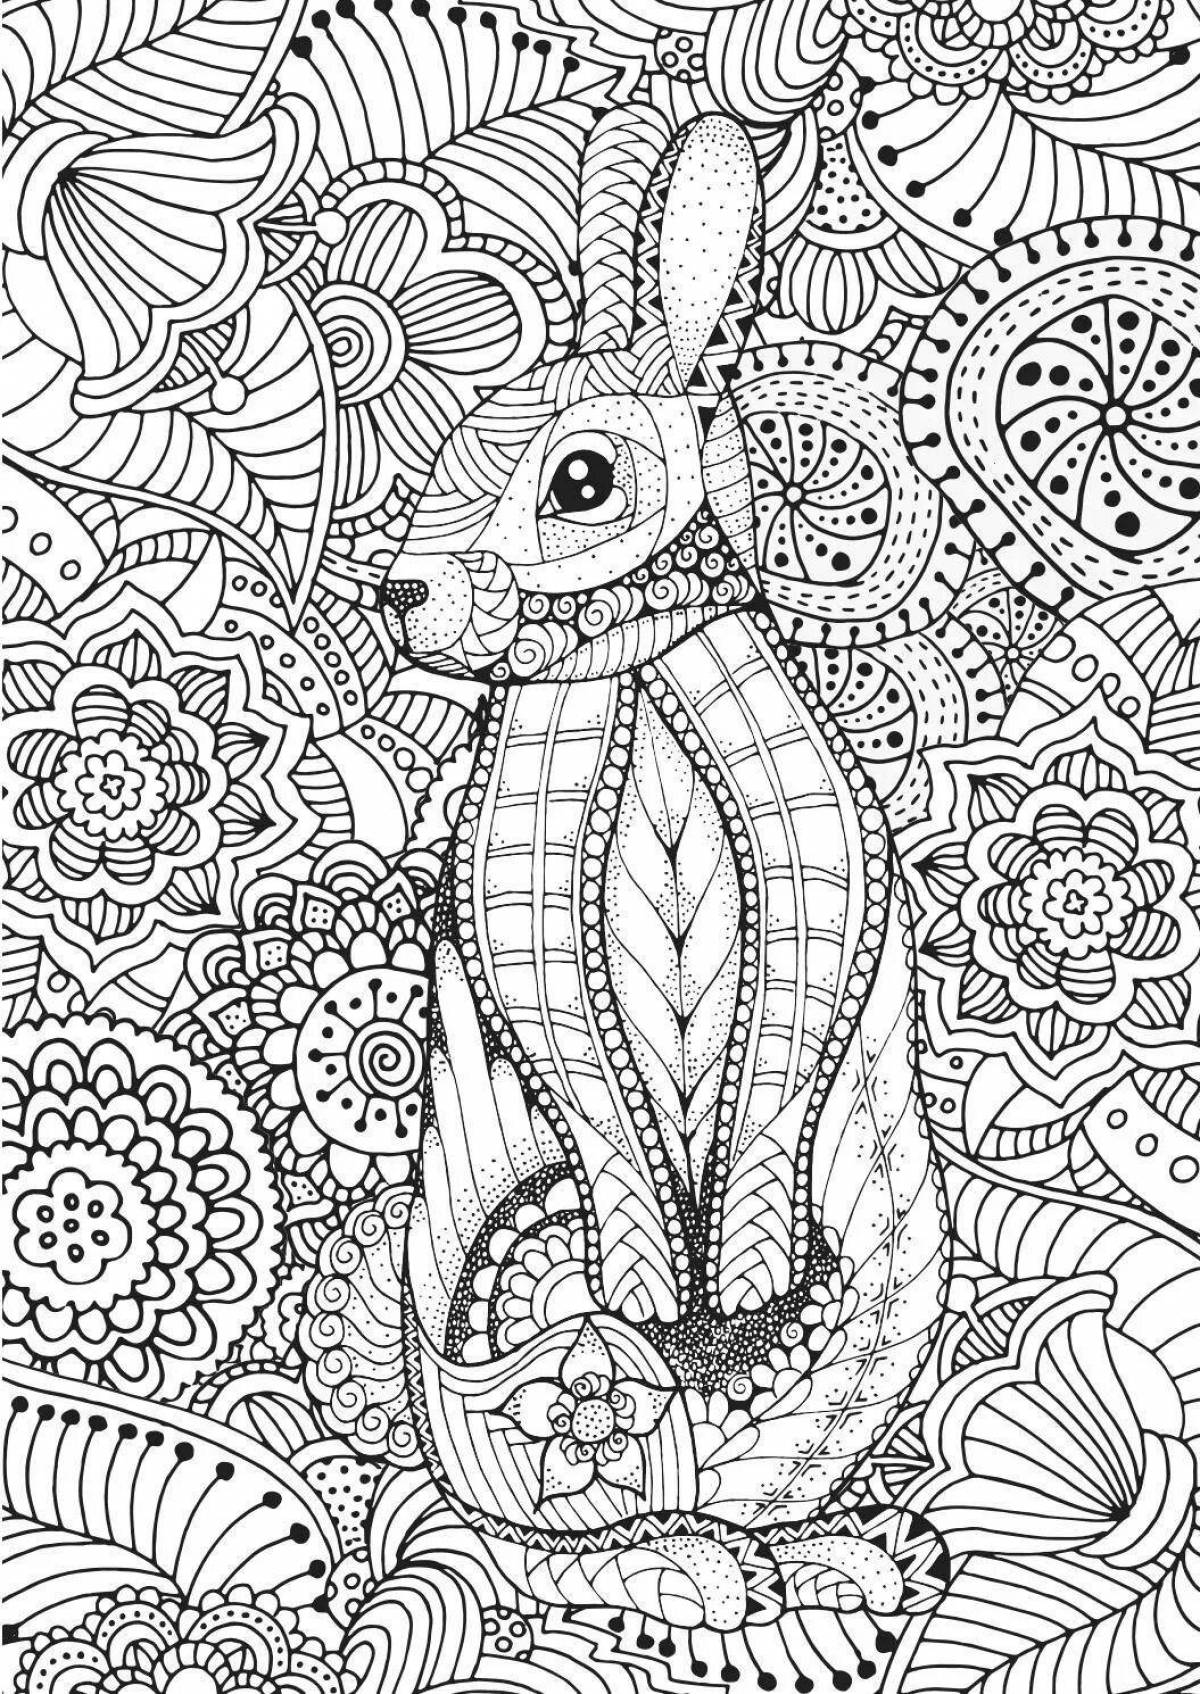 Refreshing anti-stress coloring pages for men